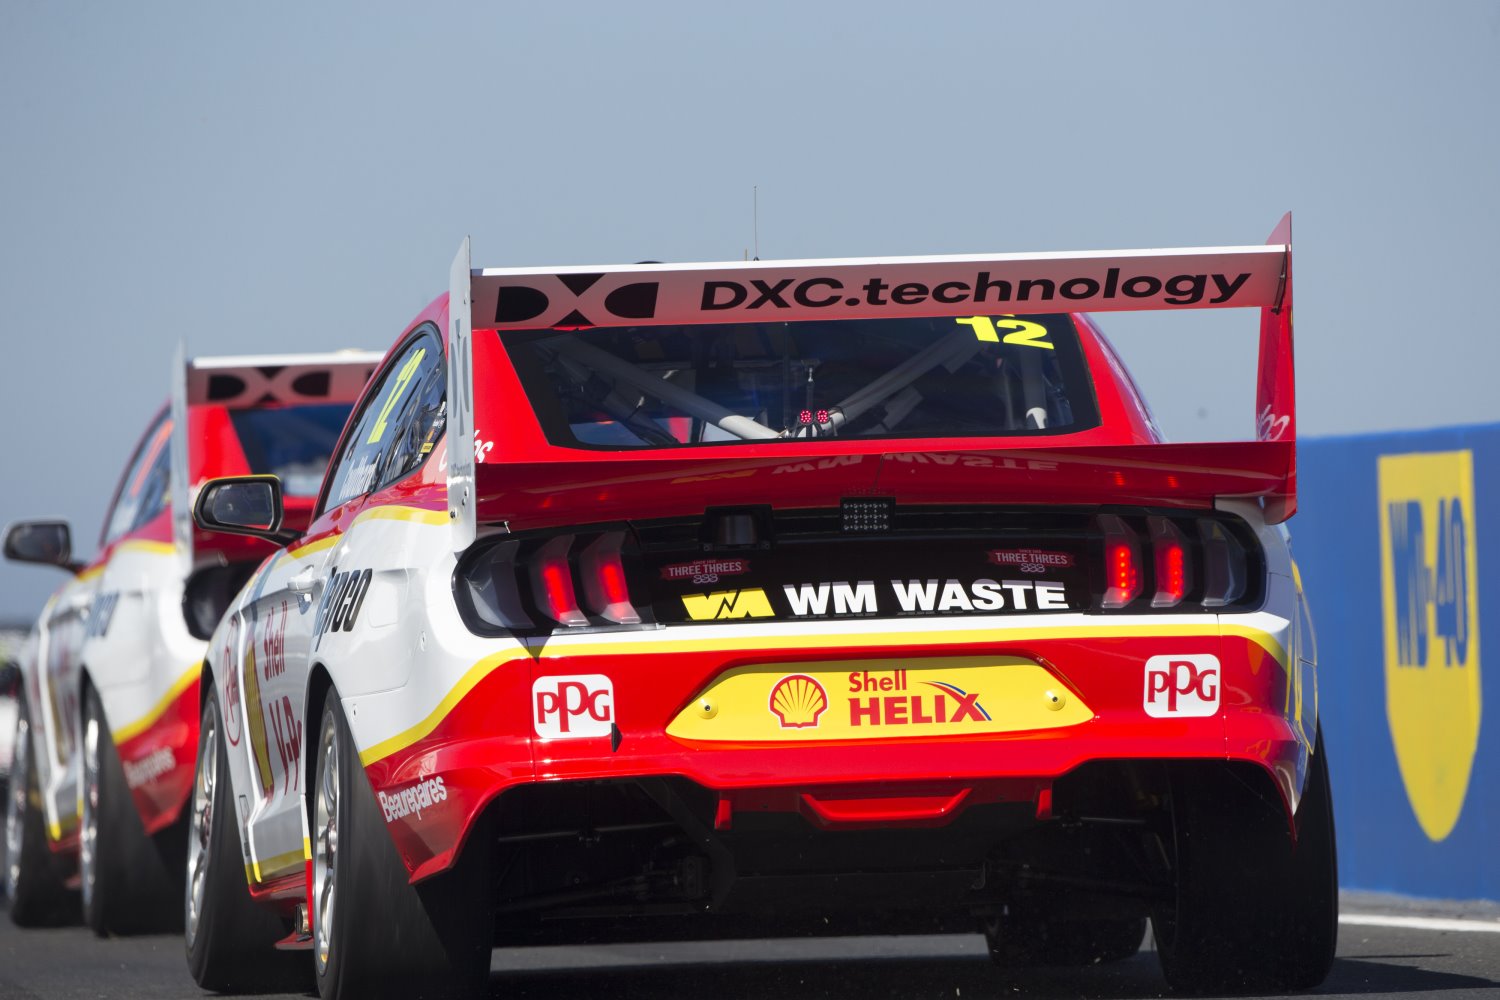 Look at the size of the rear wing on the superior Mustangs